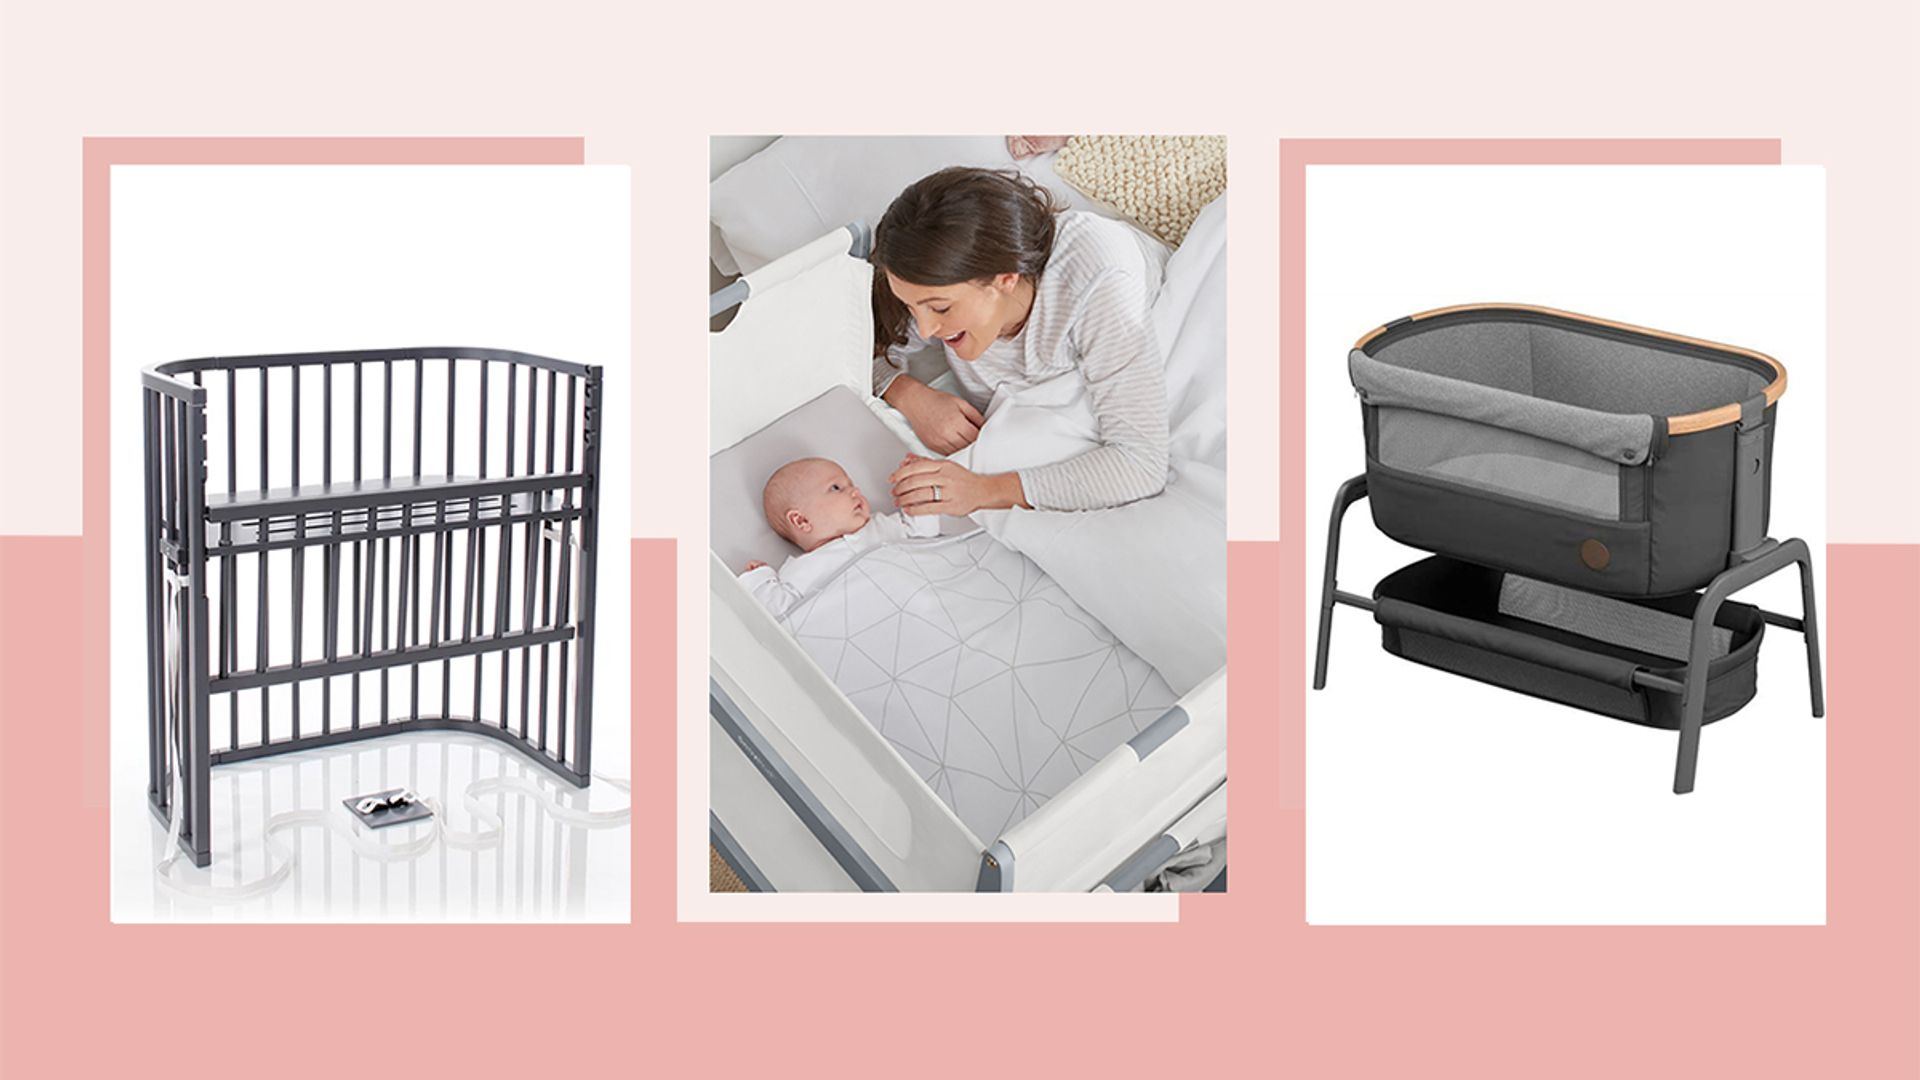 Chicco Next to Me Safety Review - Are Next to Me Cribs Safe?